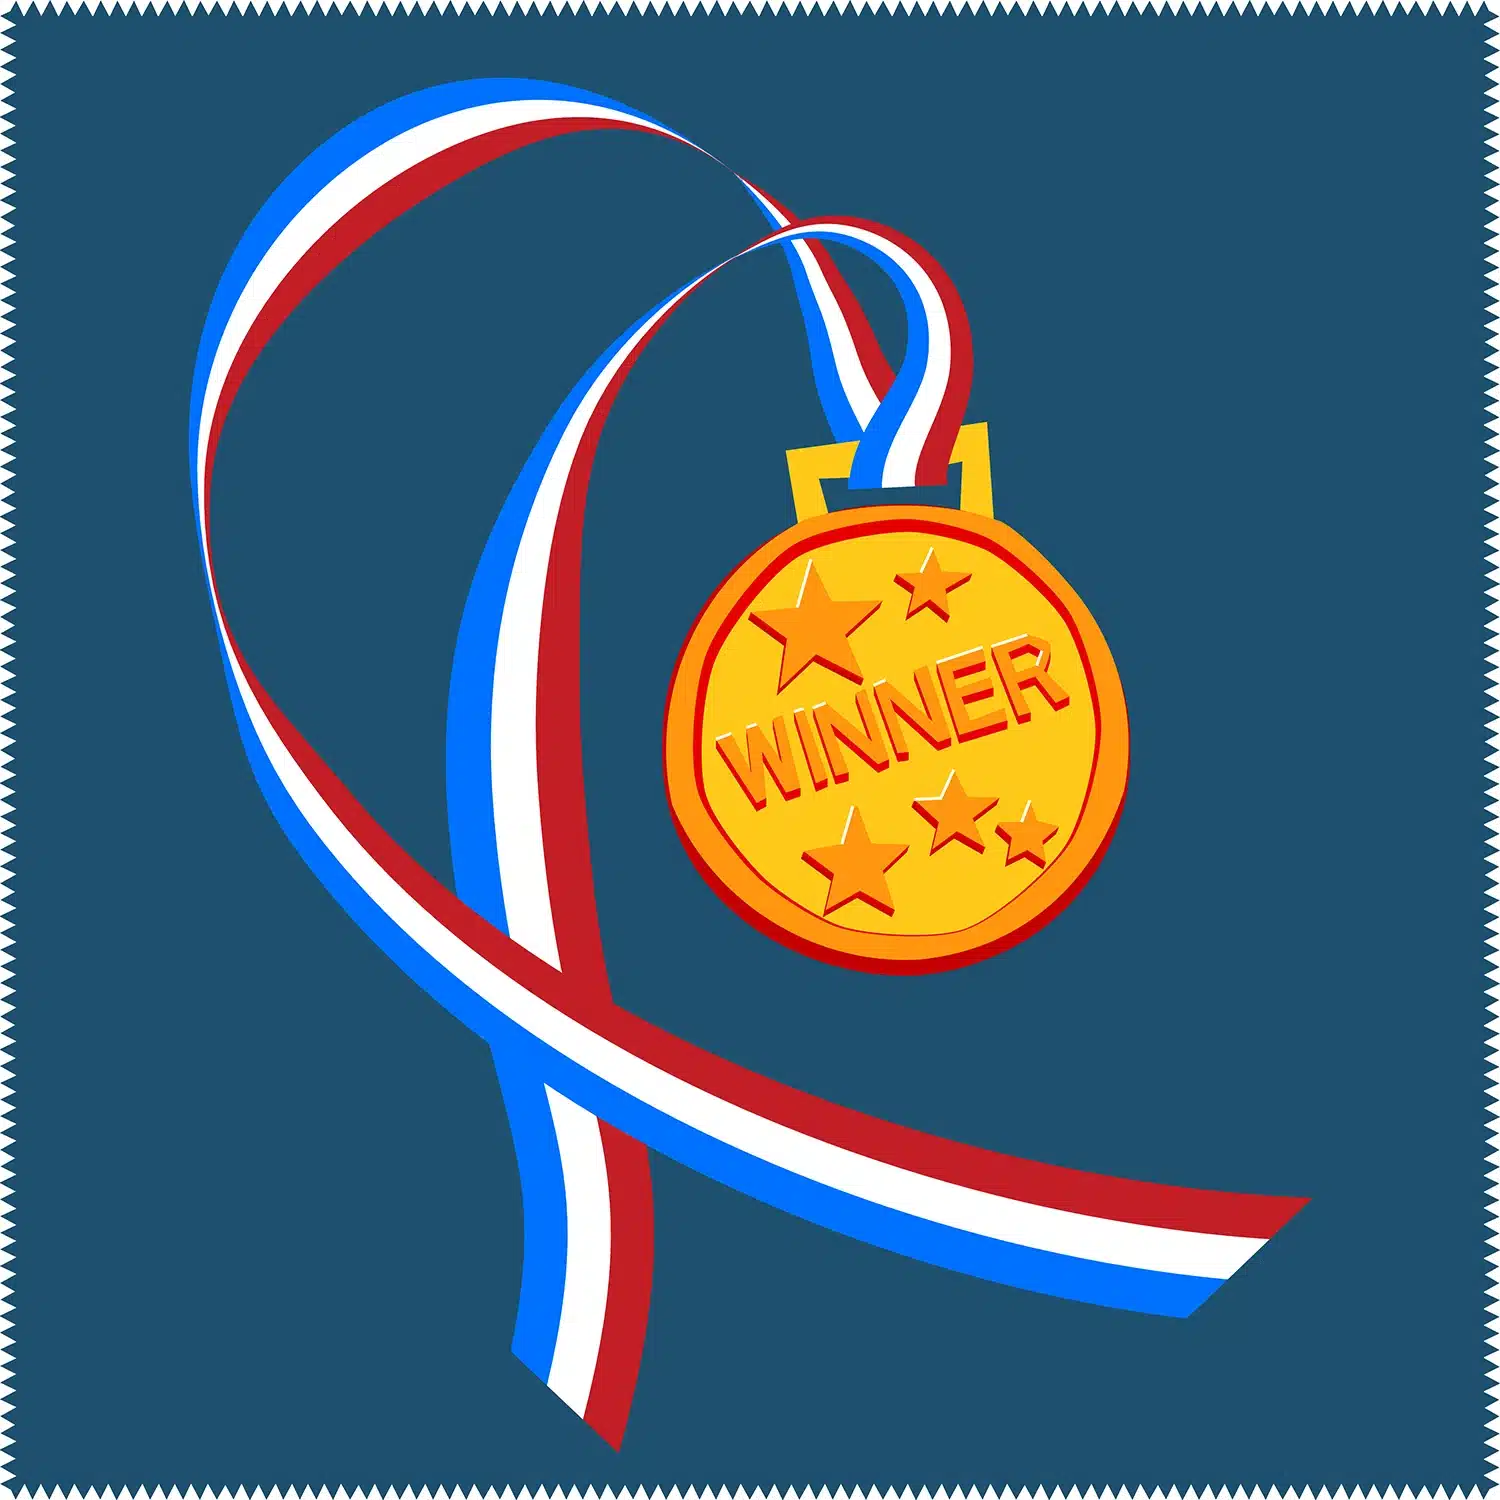 Winner Medal illustration with highlights and tight zigzag border